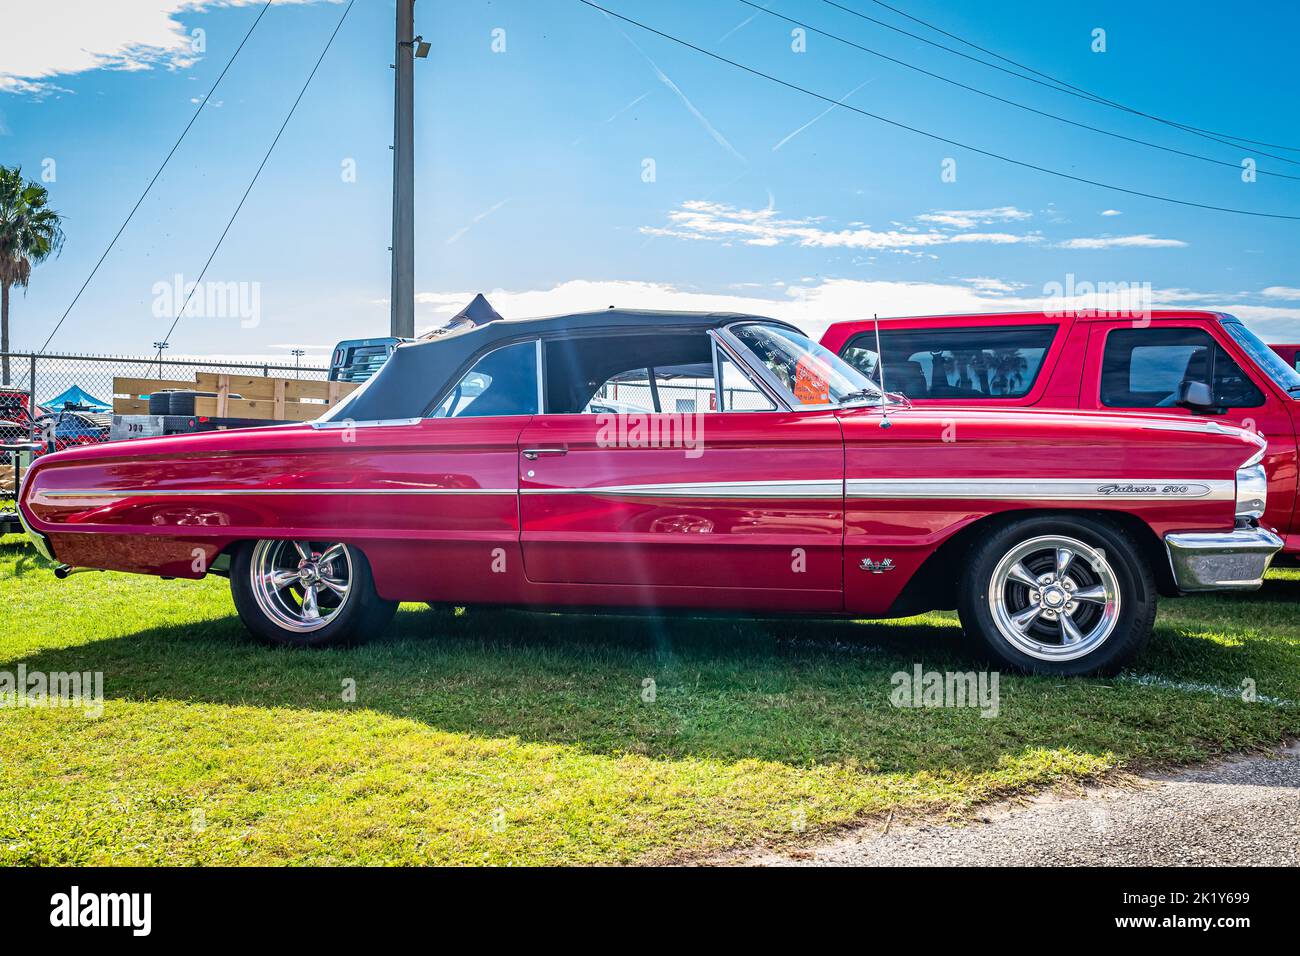 Daytona Beach, FL - November 28, 2020: Low perspective side view of a 1964 Ford Galaxie 500 Convertible at a local car show. Stock Photo